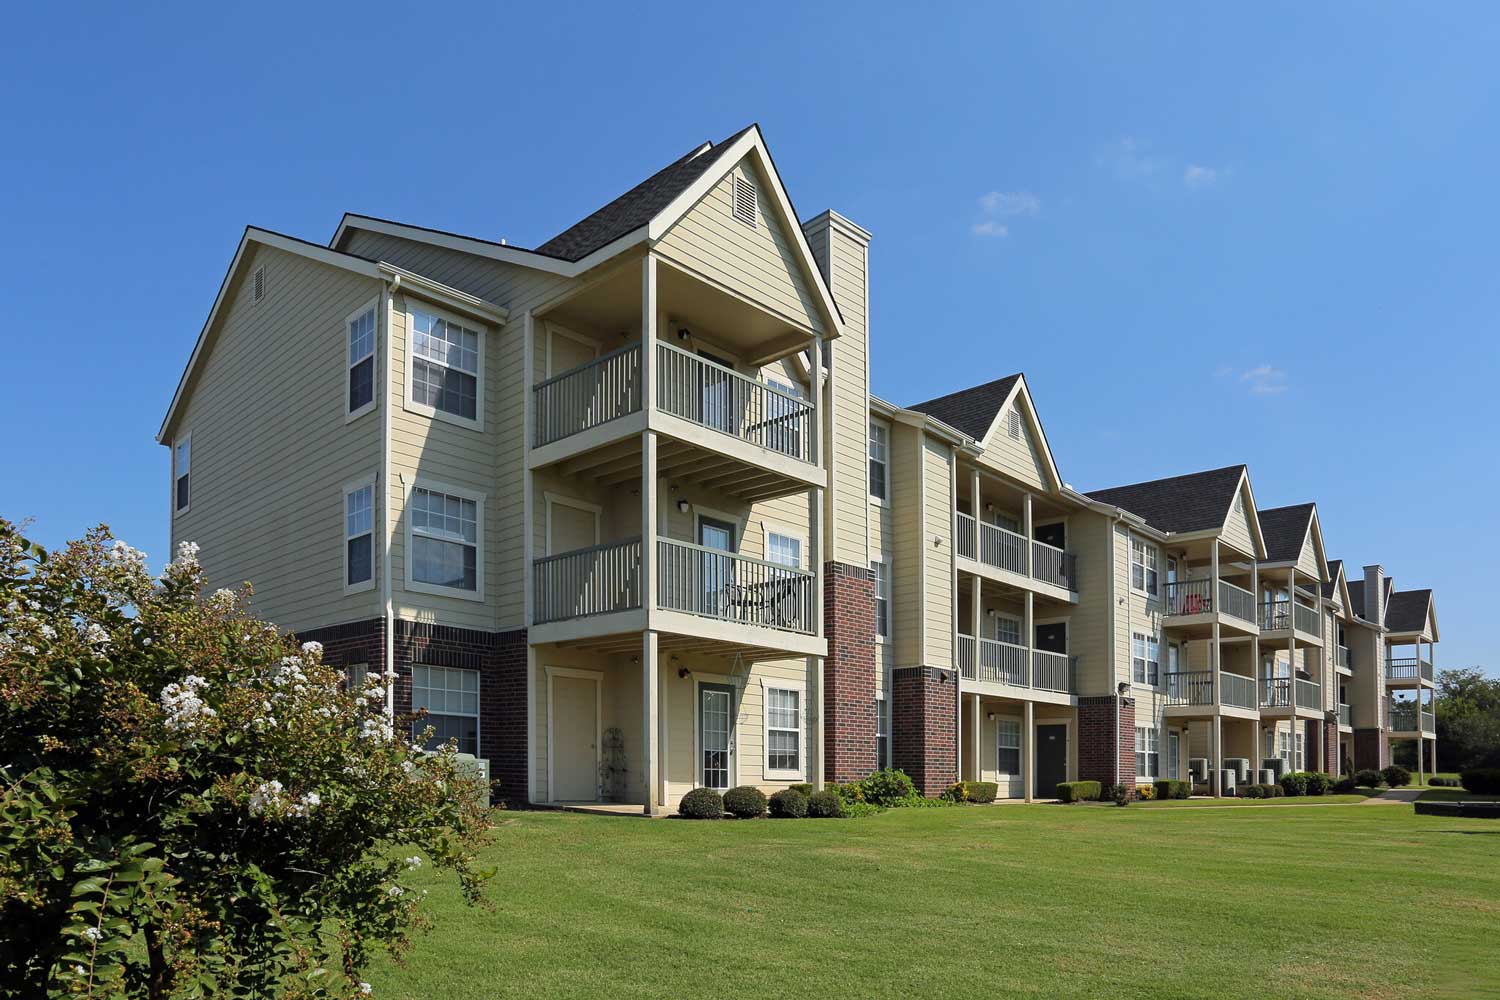 Apartments With Electronic Access Gates in Catoosa, OK